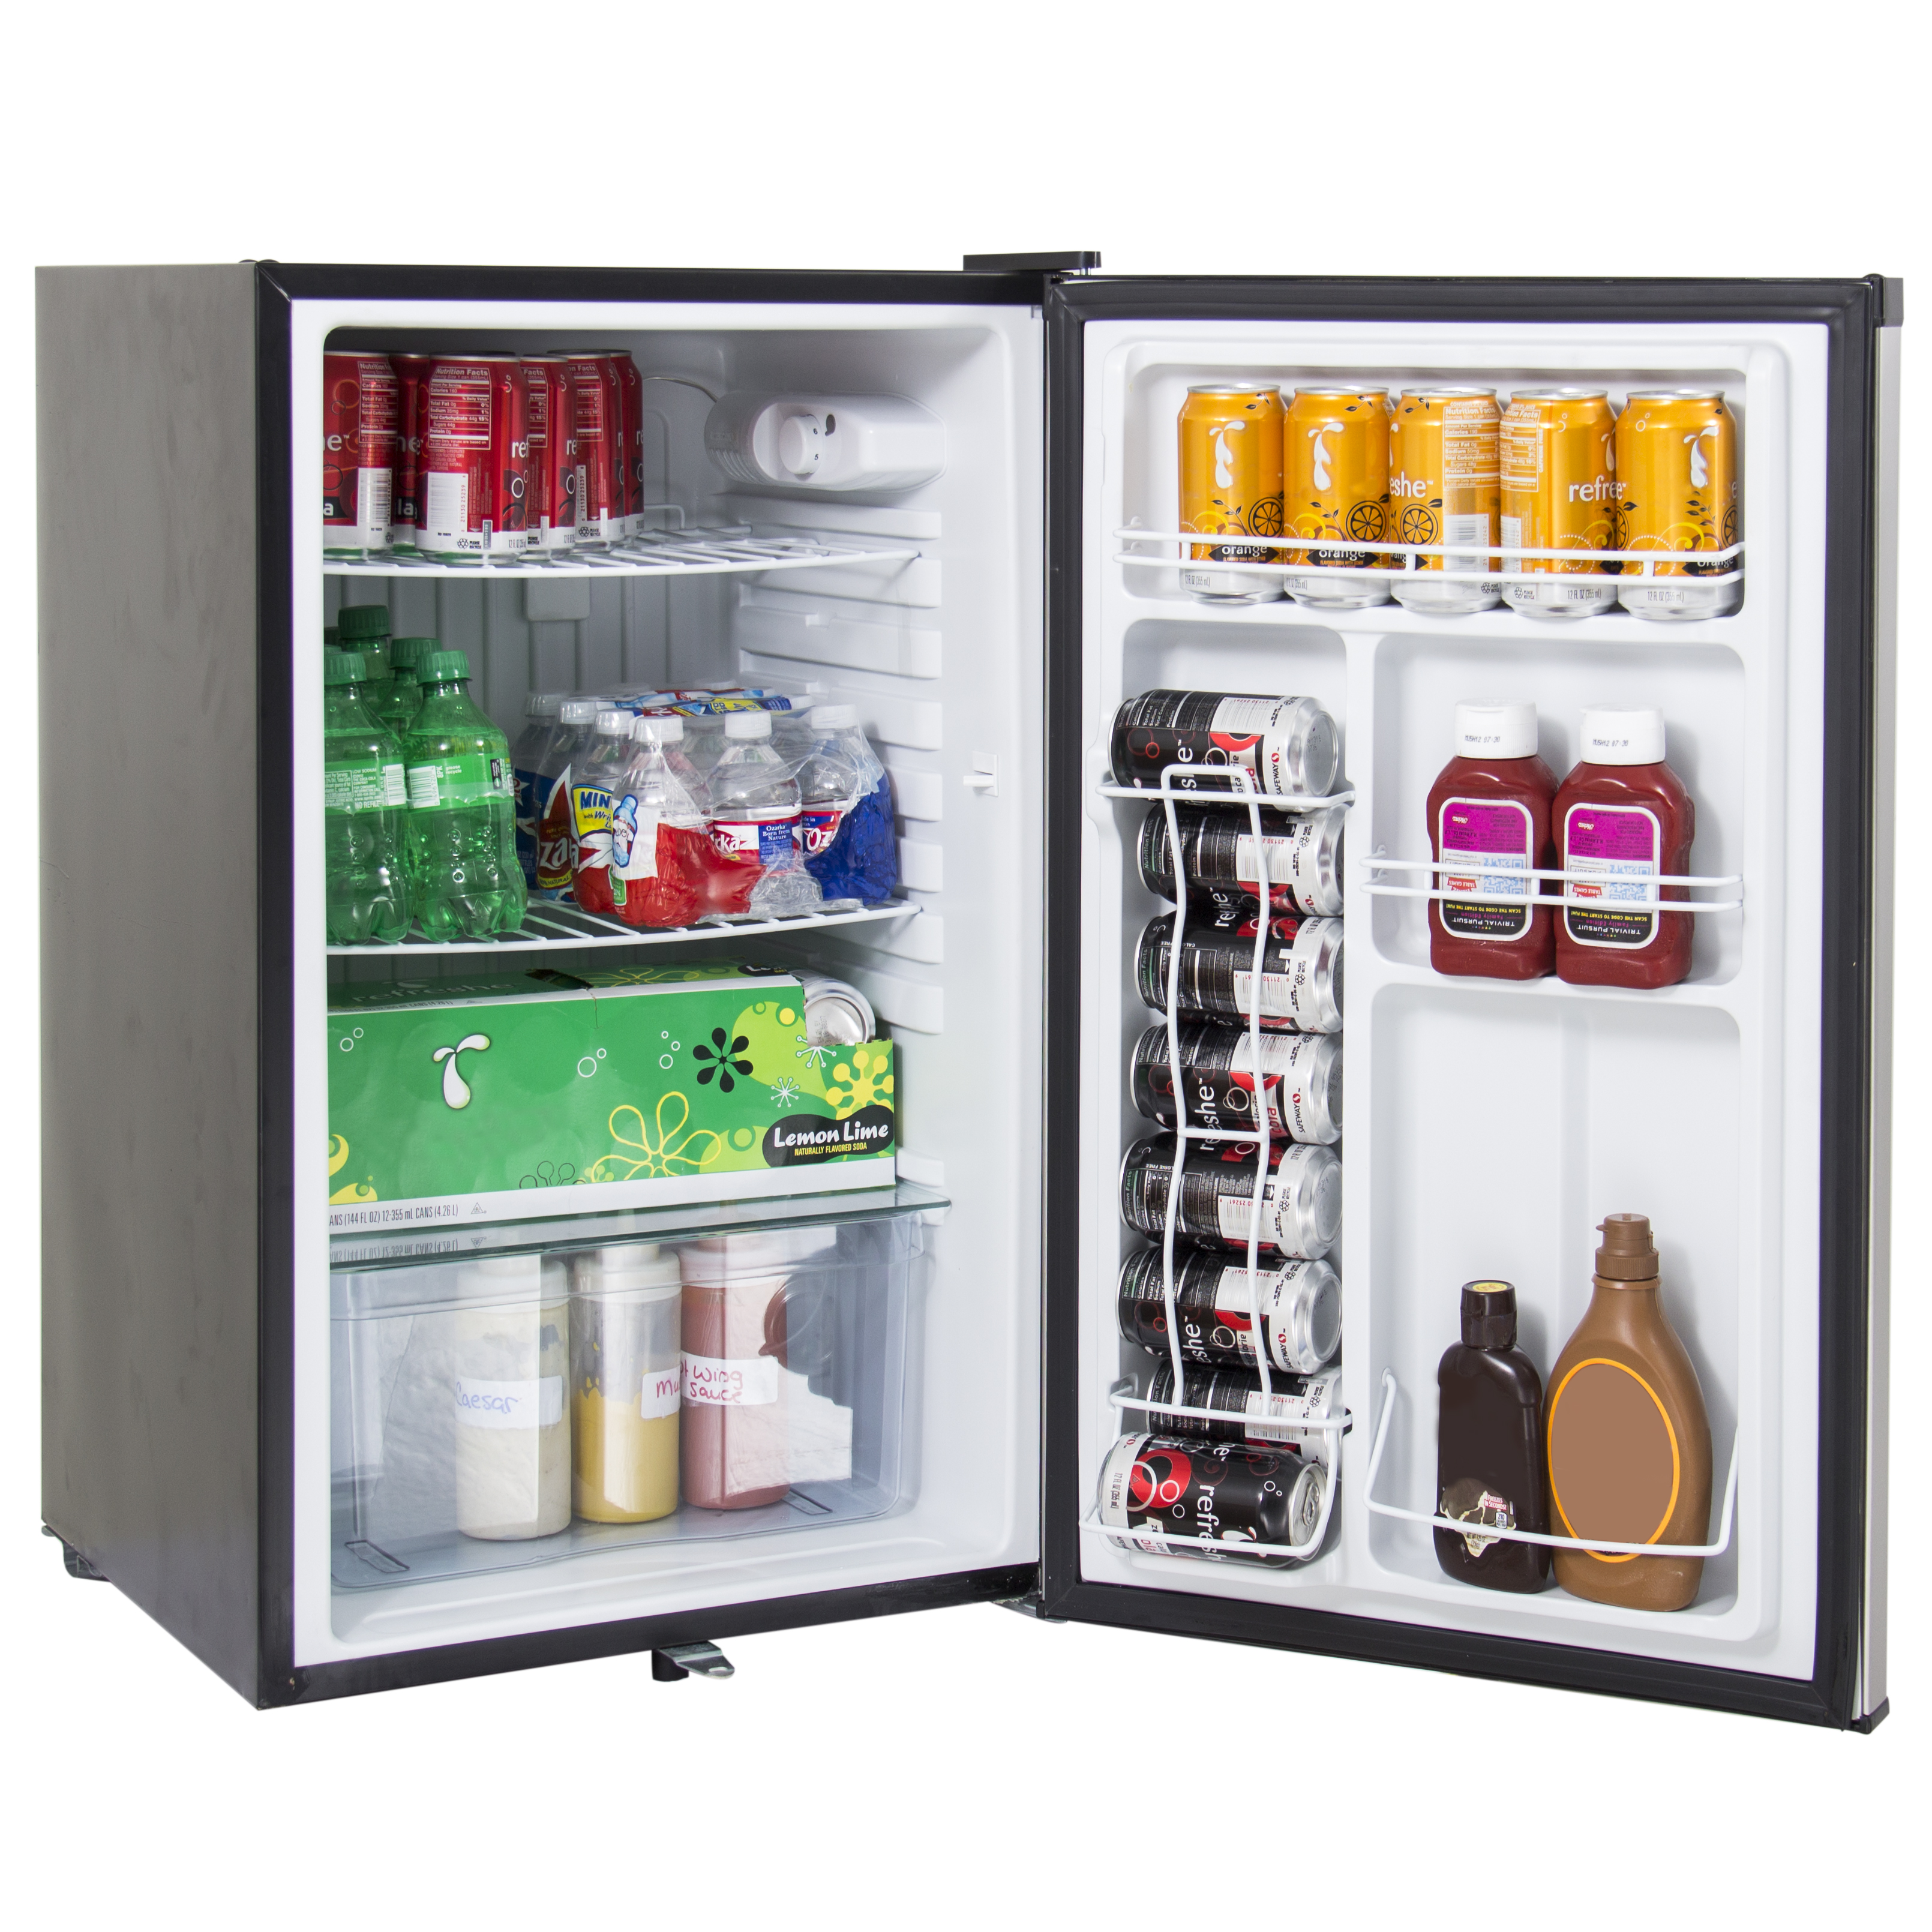 View our Selection of Outdoor Kitchen Refrigeration